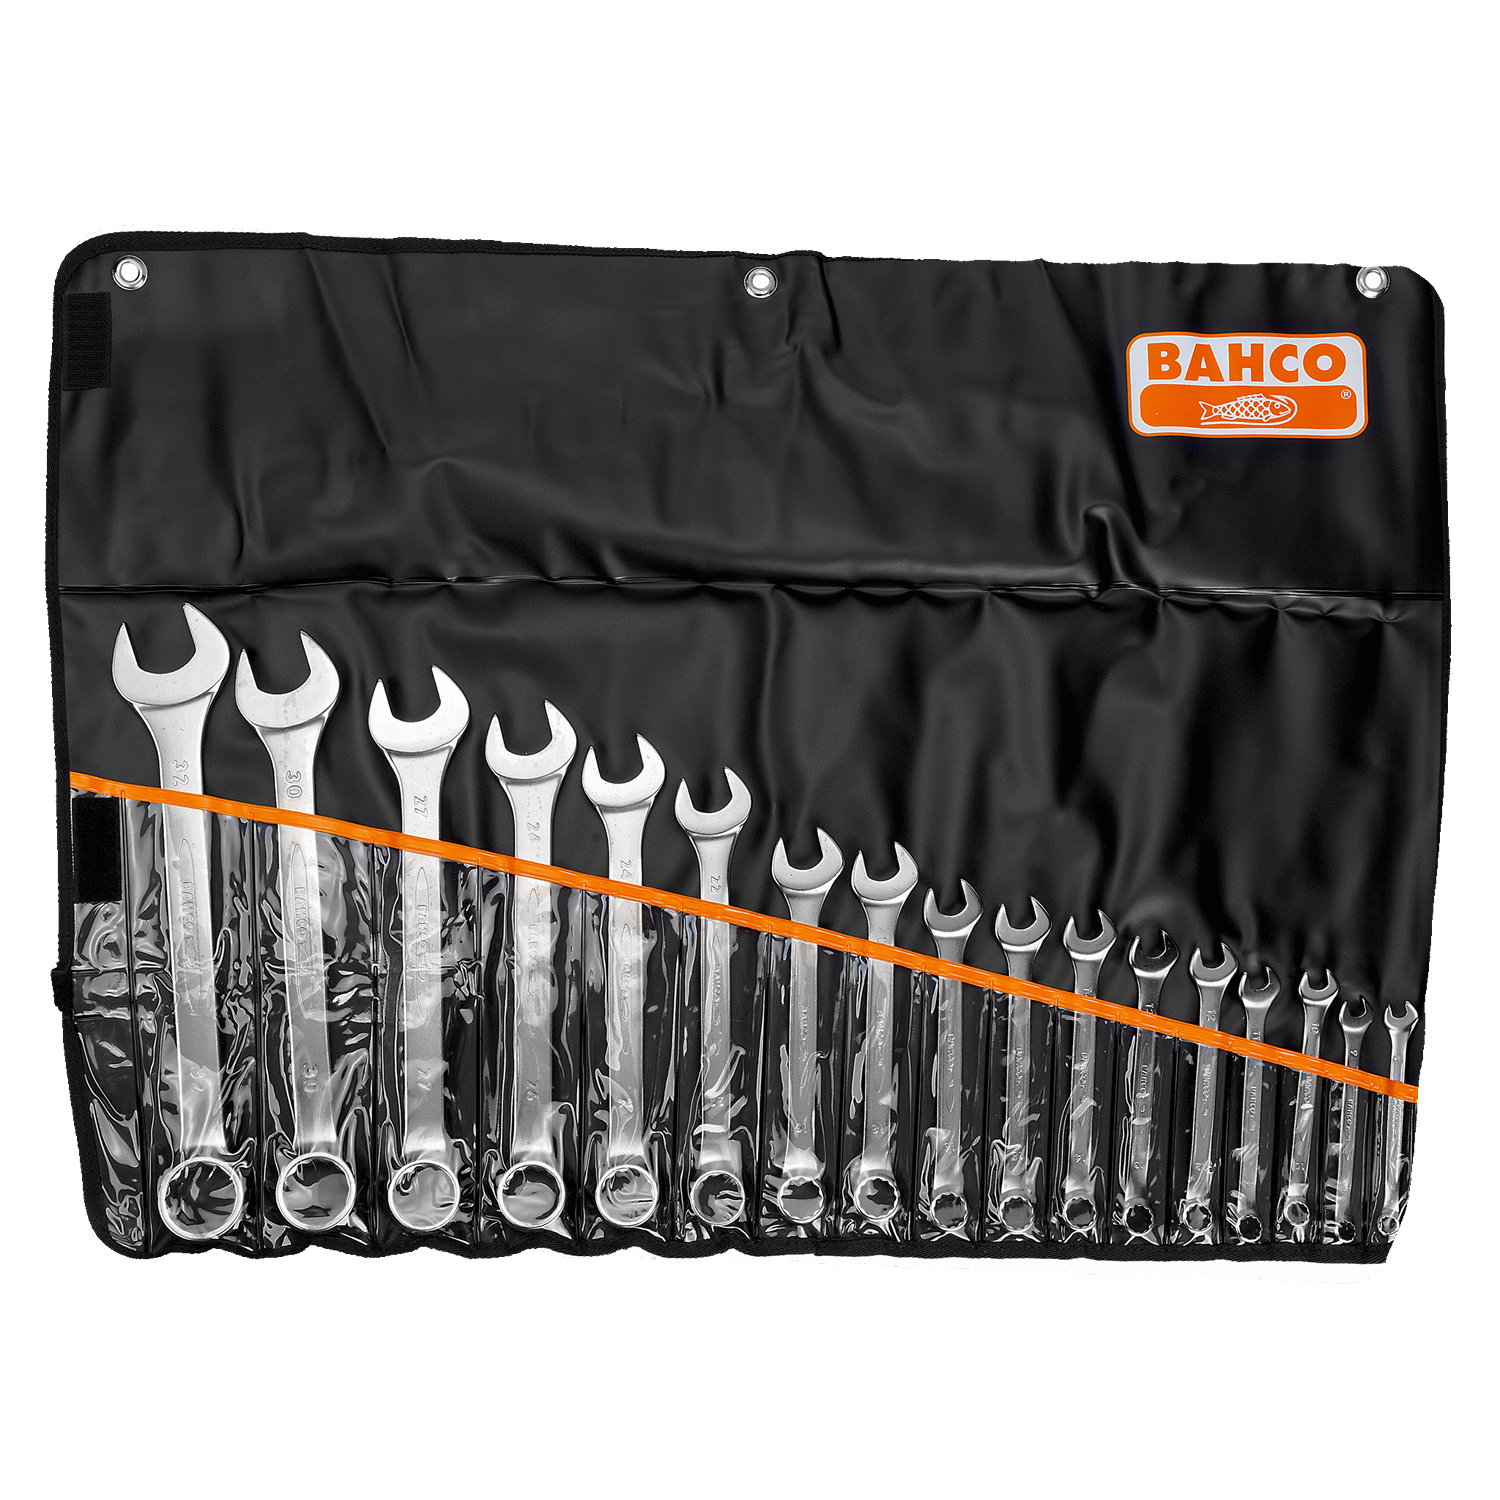 BAHCO 111M/17TL Metric Flat Combination Wrench Set 8-32 mm-17 Pcs - Premium Flat Combination Wrench Set from BAHCO - Shop now at Yew Aik.